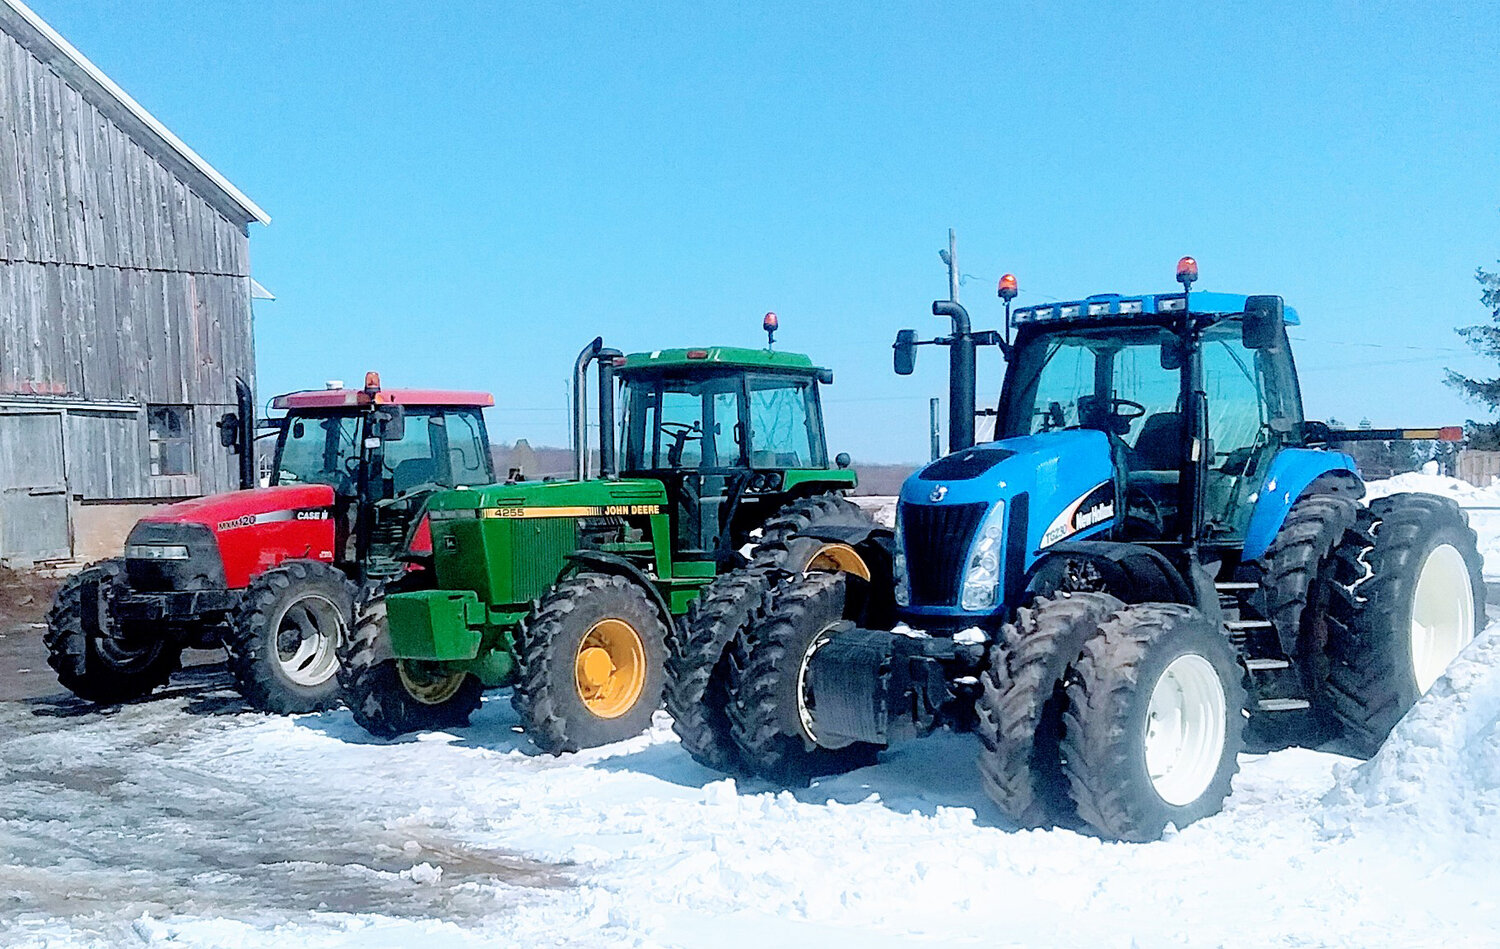 Spring is an expensive time of year for local farmers.  It took 250 gallons of fuel, at $4 per gallon, to fill up this trio of tractors, enough to run them for 12 hours or one full working day. Last year, the Simons farm in Steuben used 4,000 gallons of fuel to complete tillage, spread lime and fertilizer, and spray plants for weed control as well as harvest the crops in the fall.